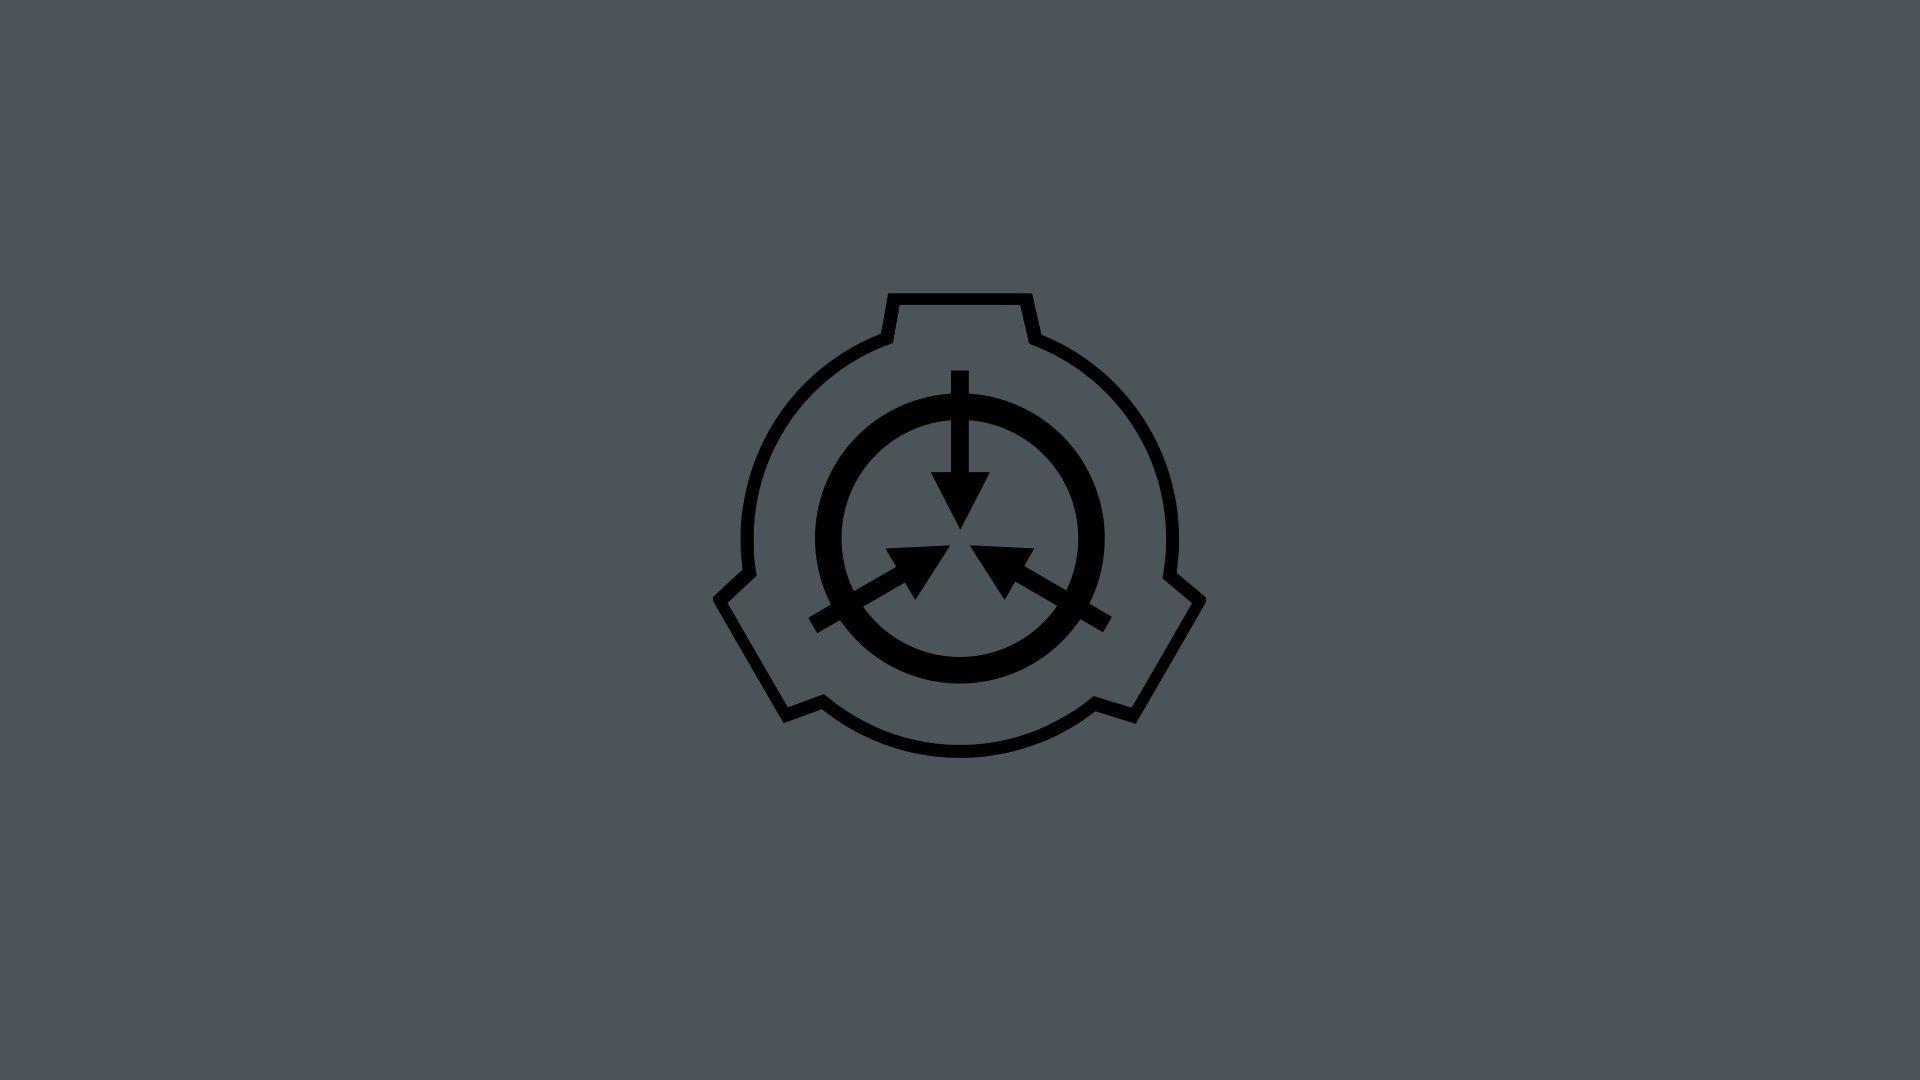 SCP Foundation Wallpapers - Top Free SCP Foundation Backgrounds